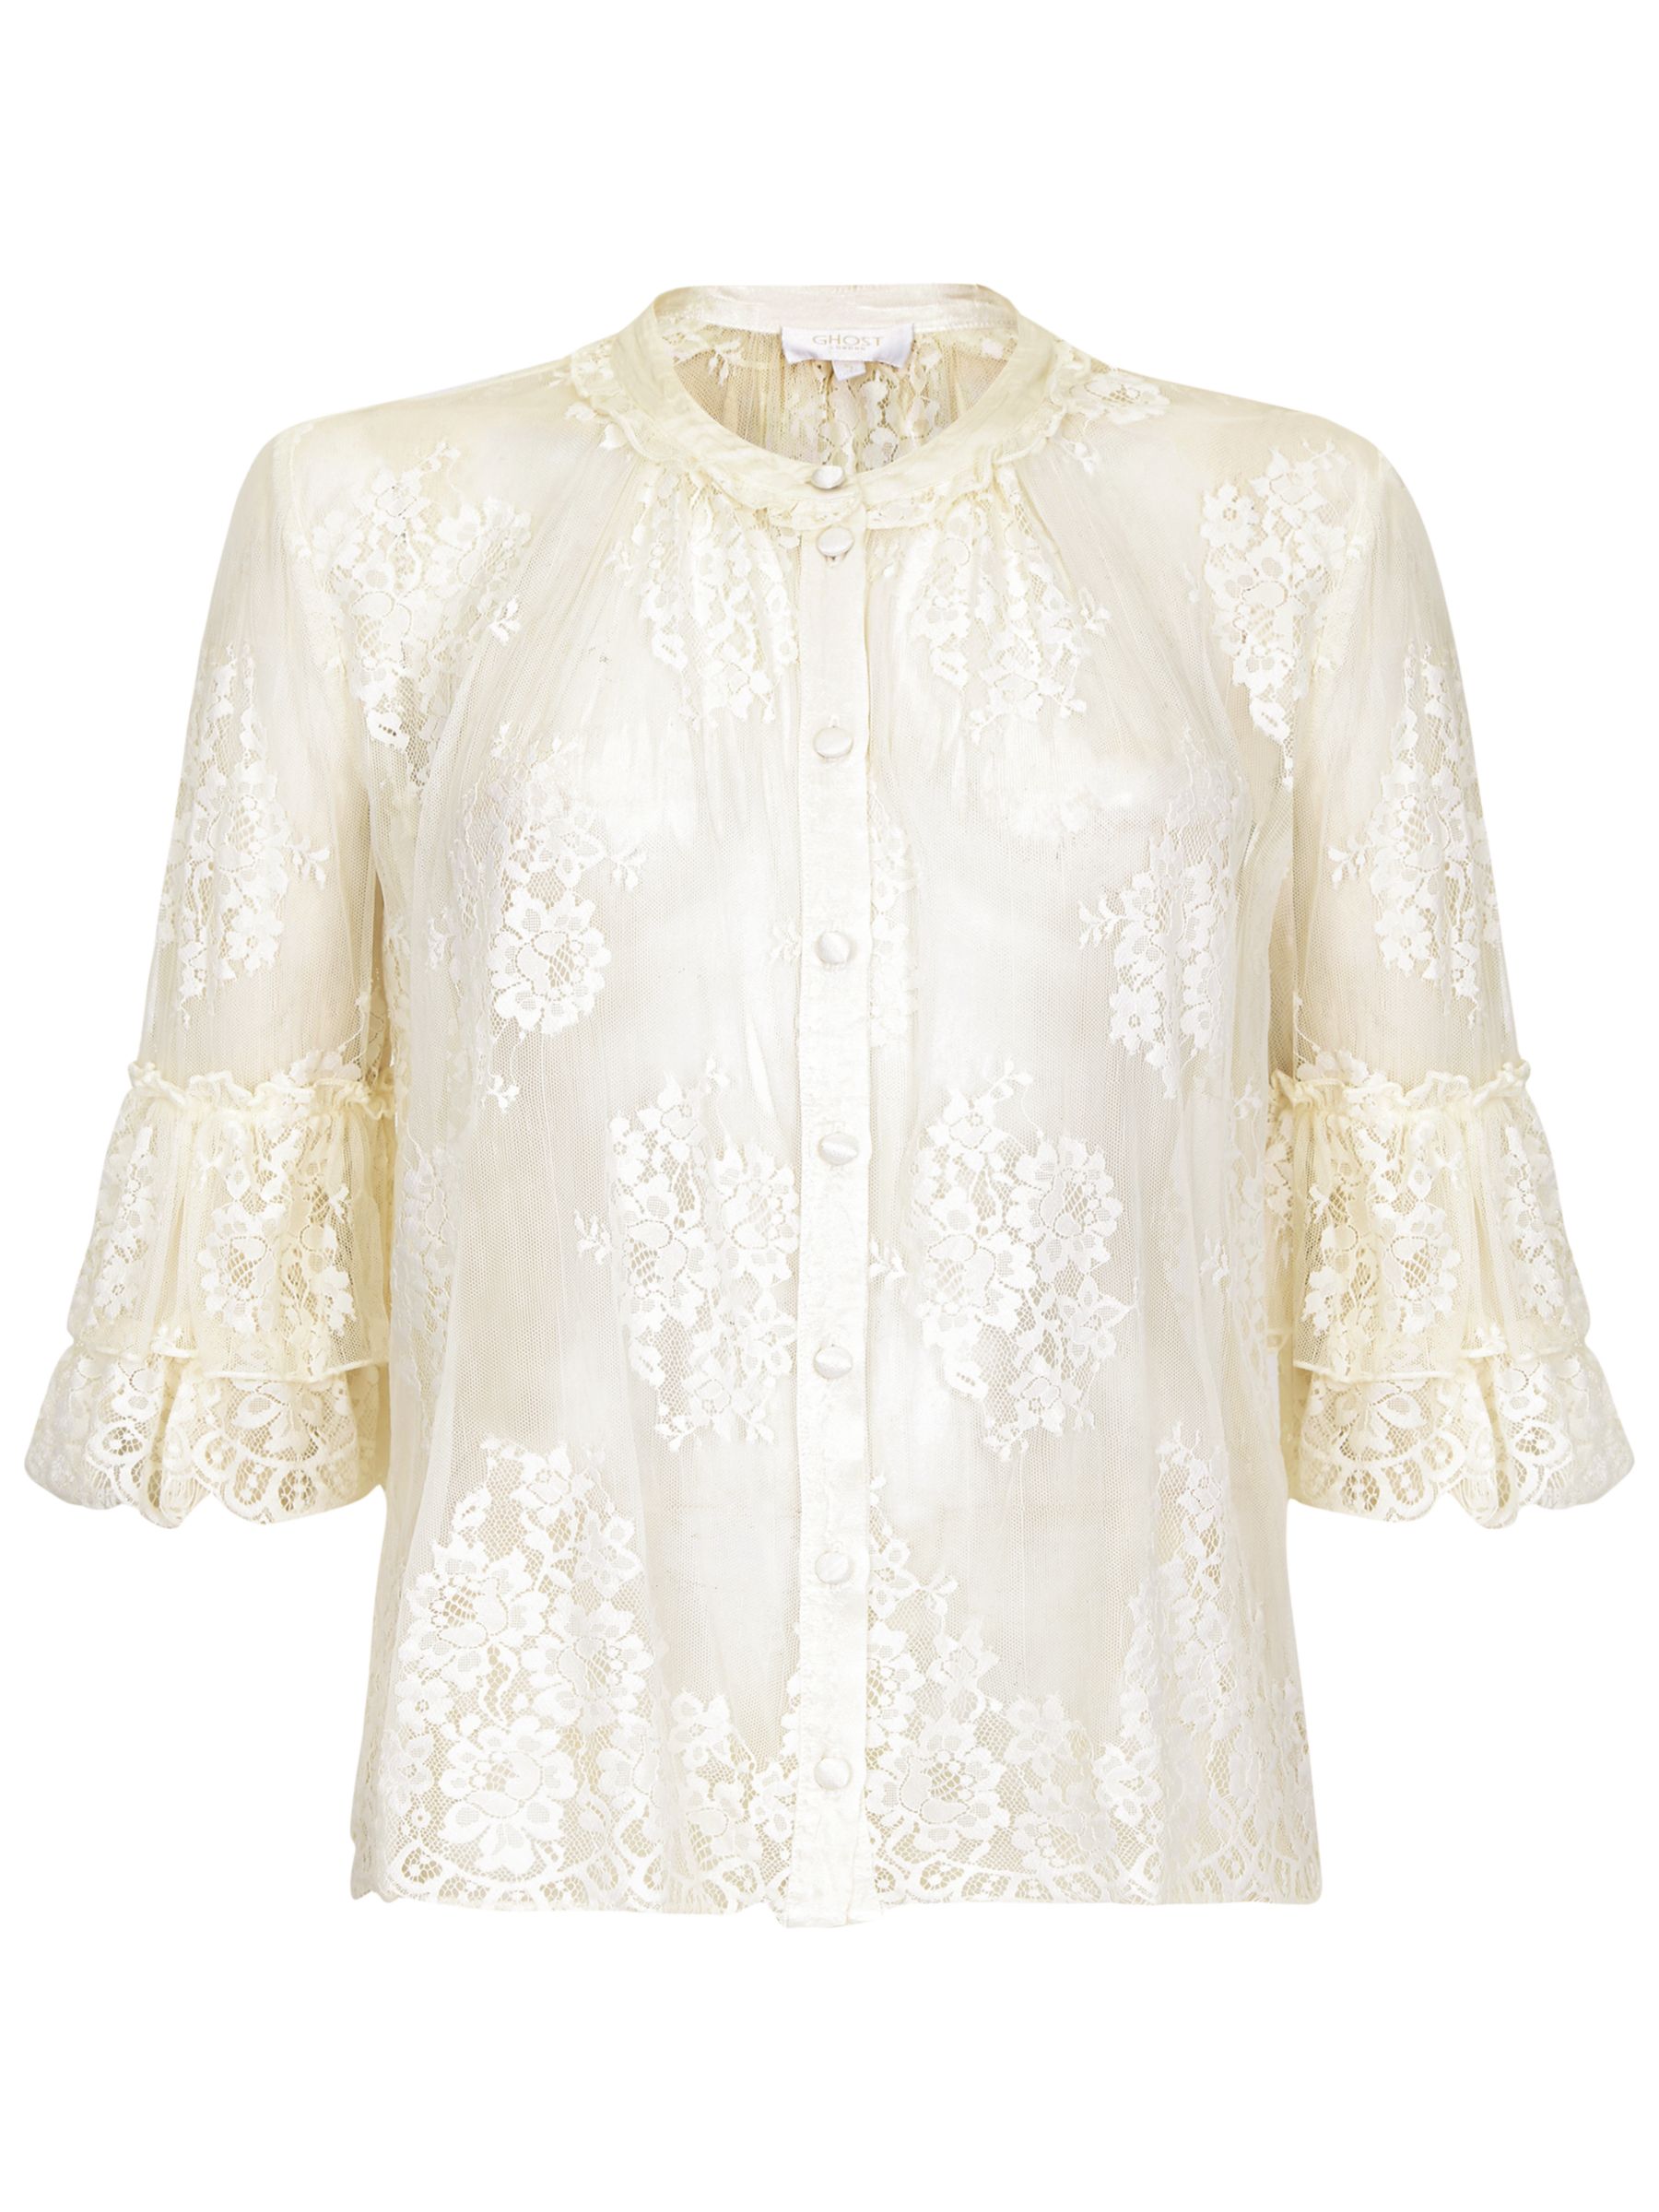 1900s Edwardian Style Blouses, Tops & Sweaters